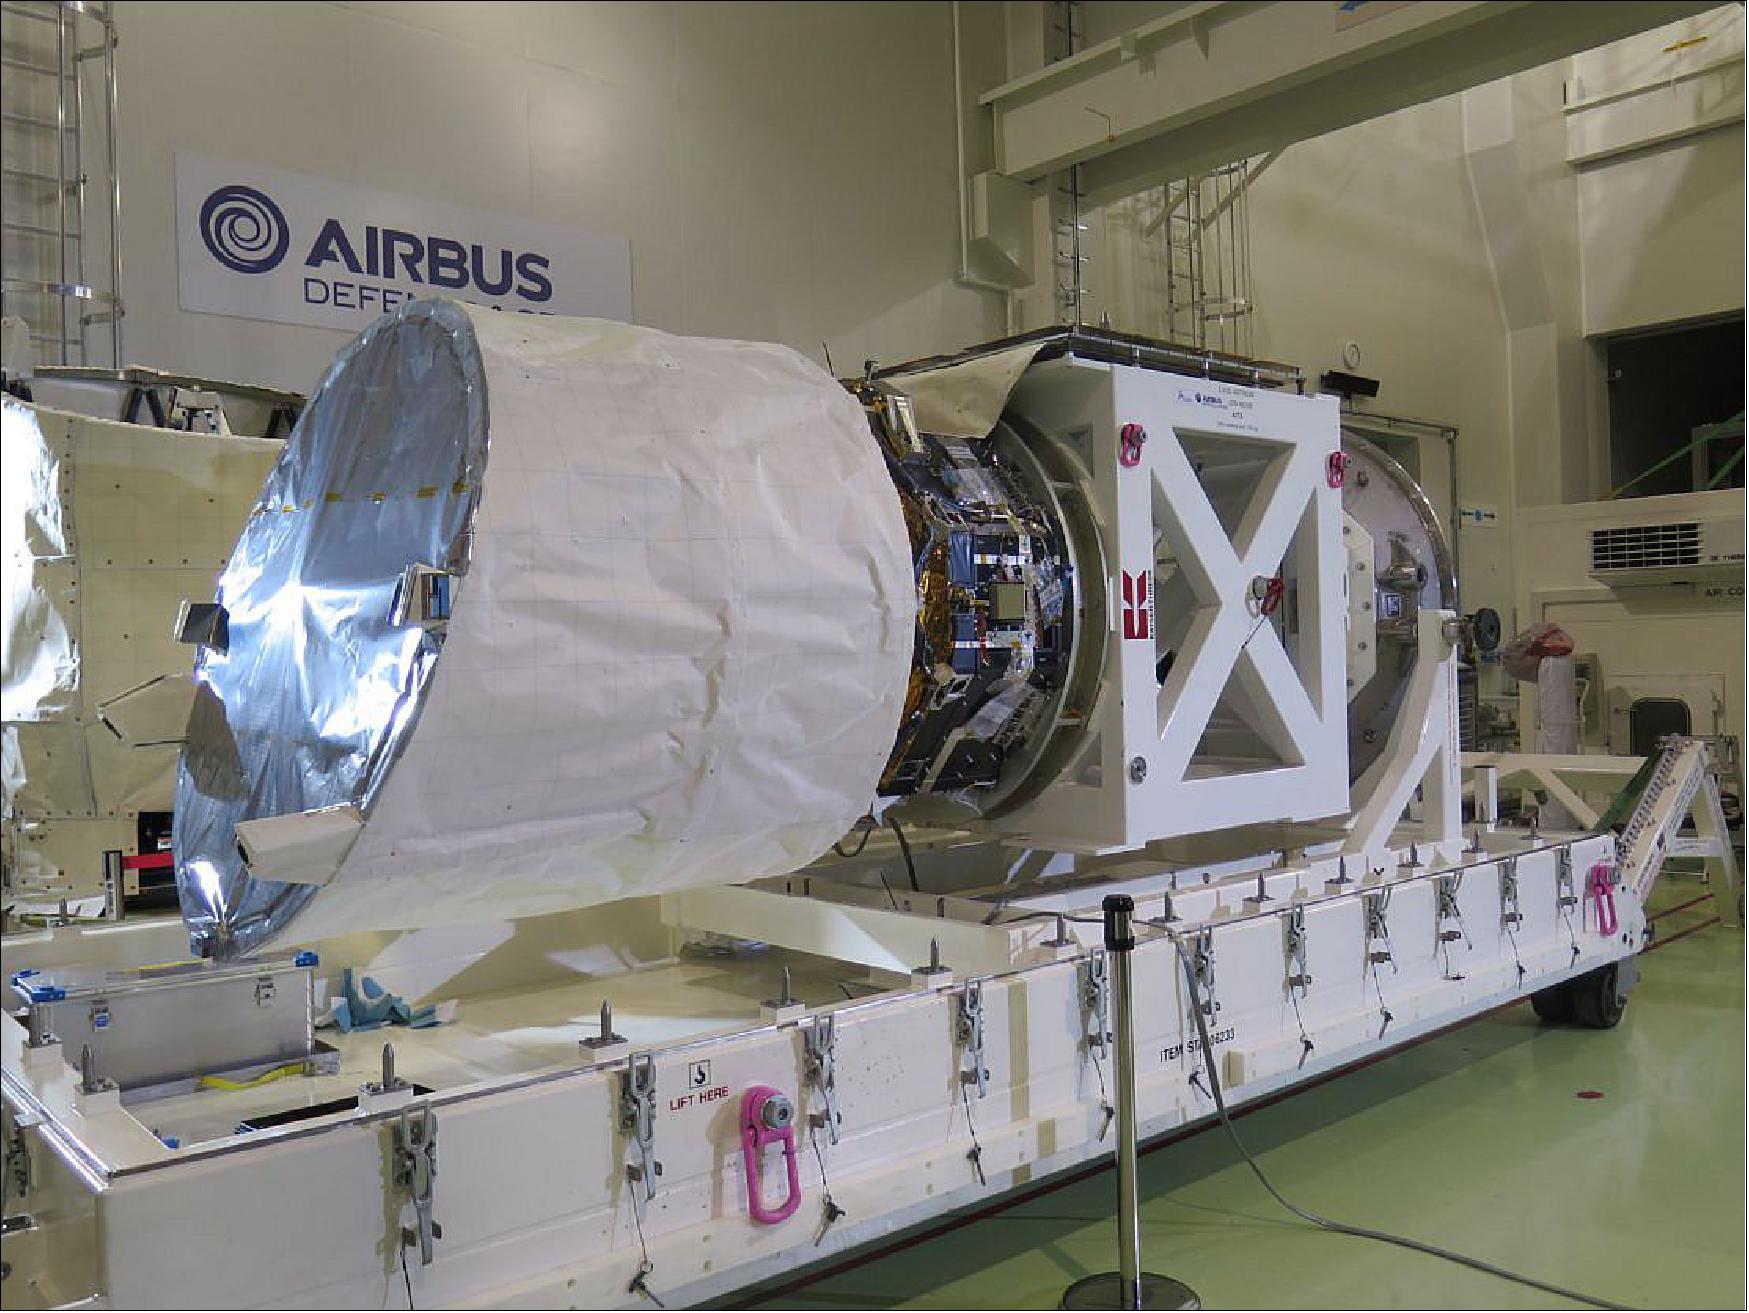 Figure 78: Photo of the ALADIN telescope and instrumentation at Airbus DS in Toulouse to be shipped to Airbus DS UK for installation into the ADM/Aeolus spacecraft (image credit: Airbus DS)